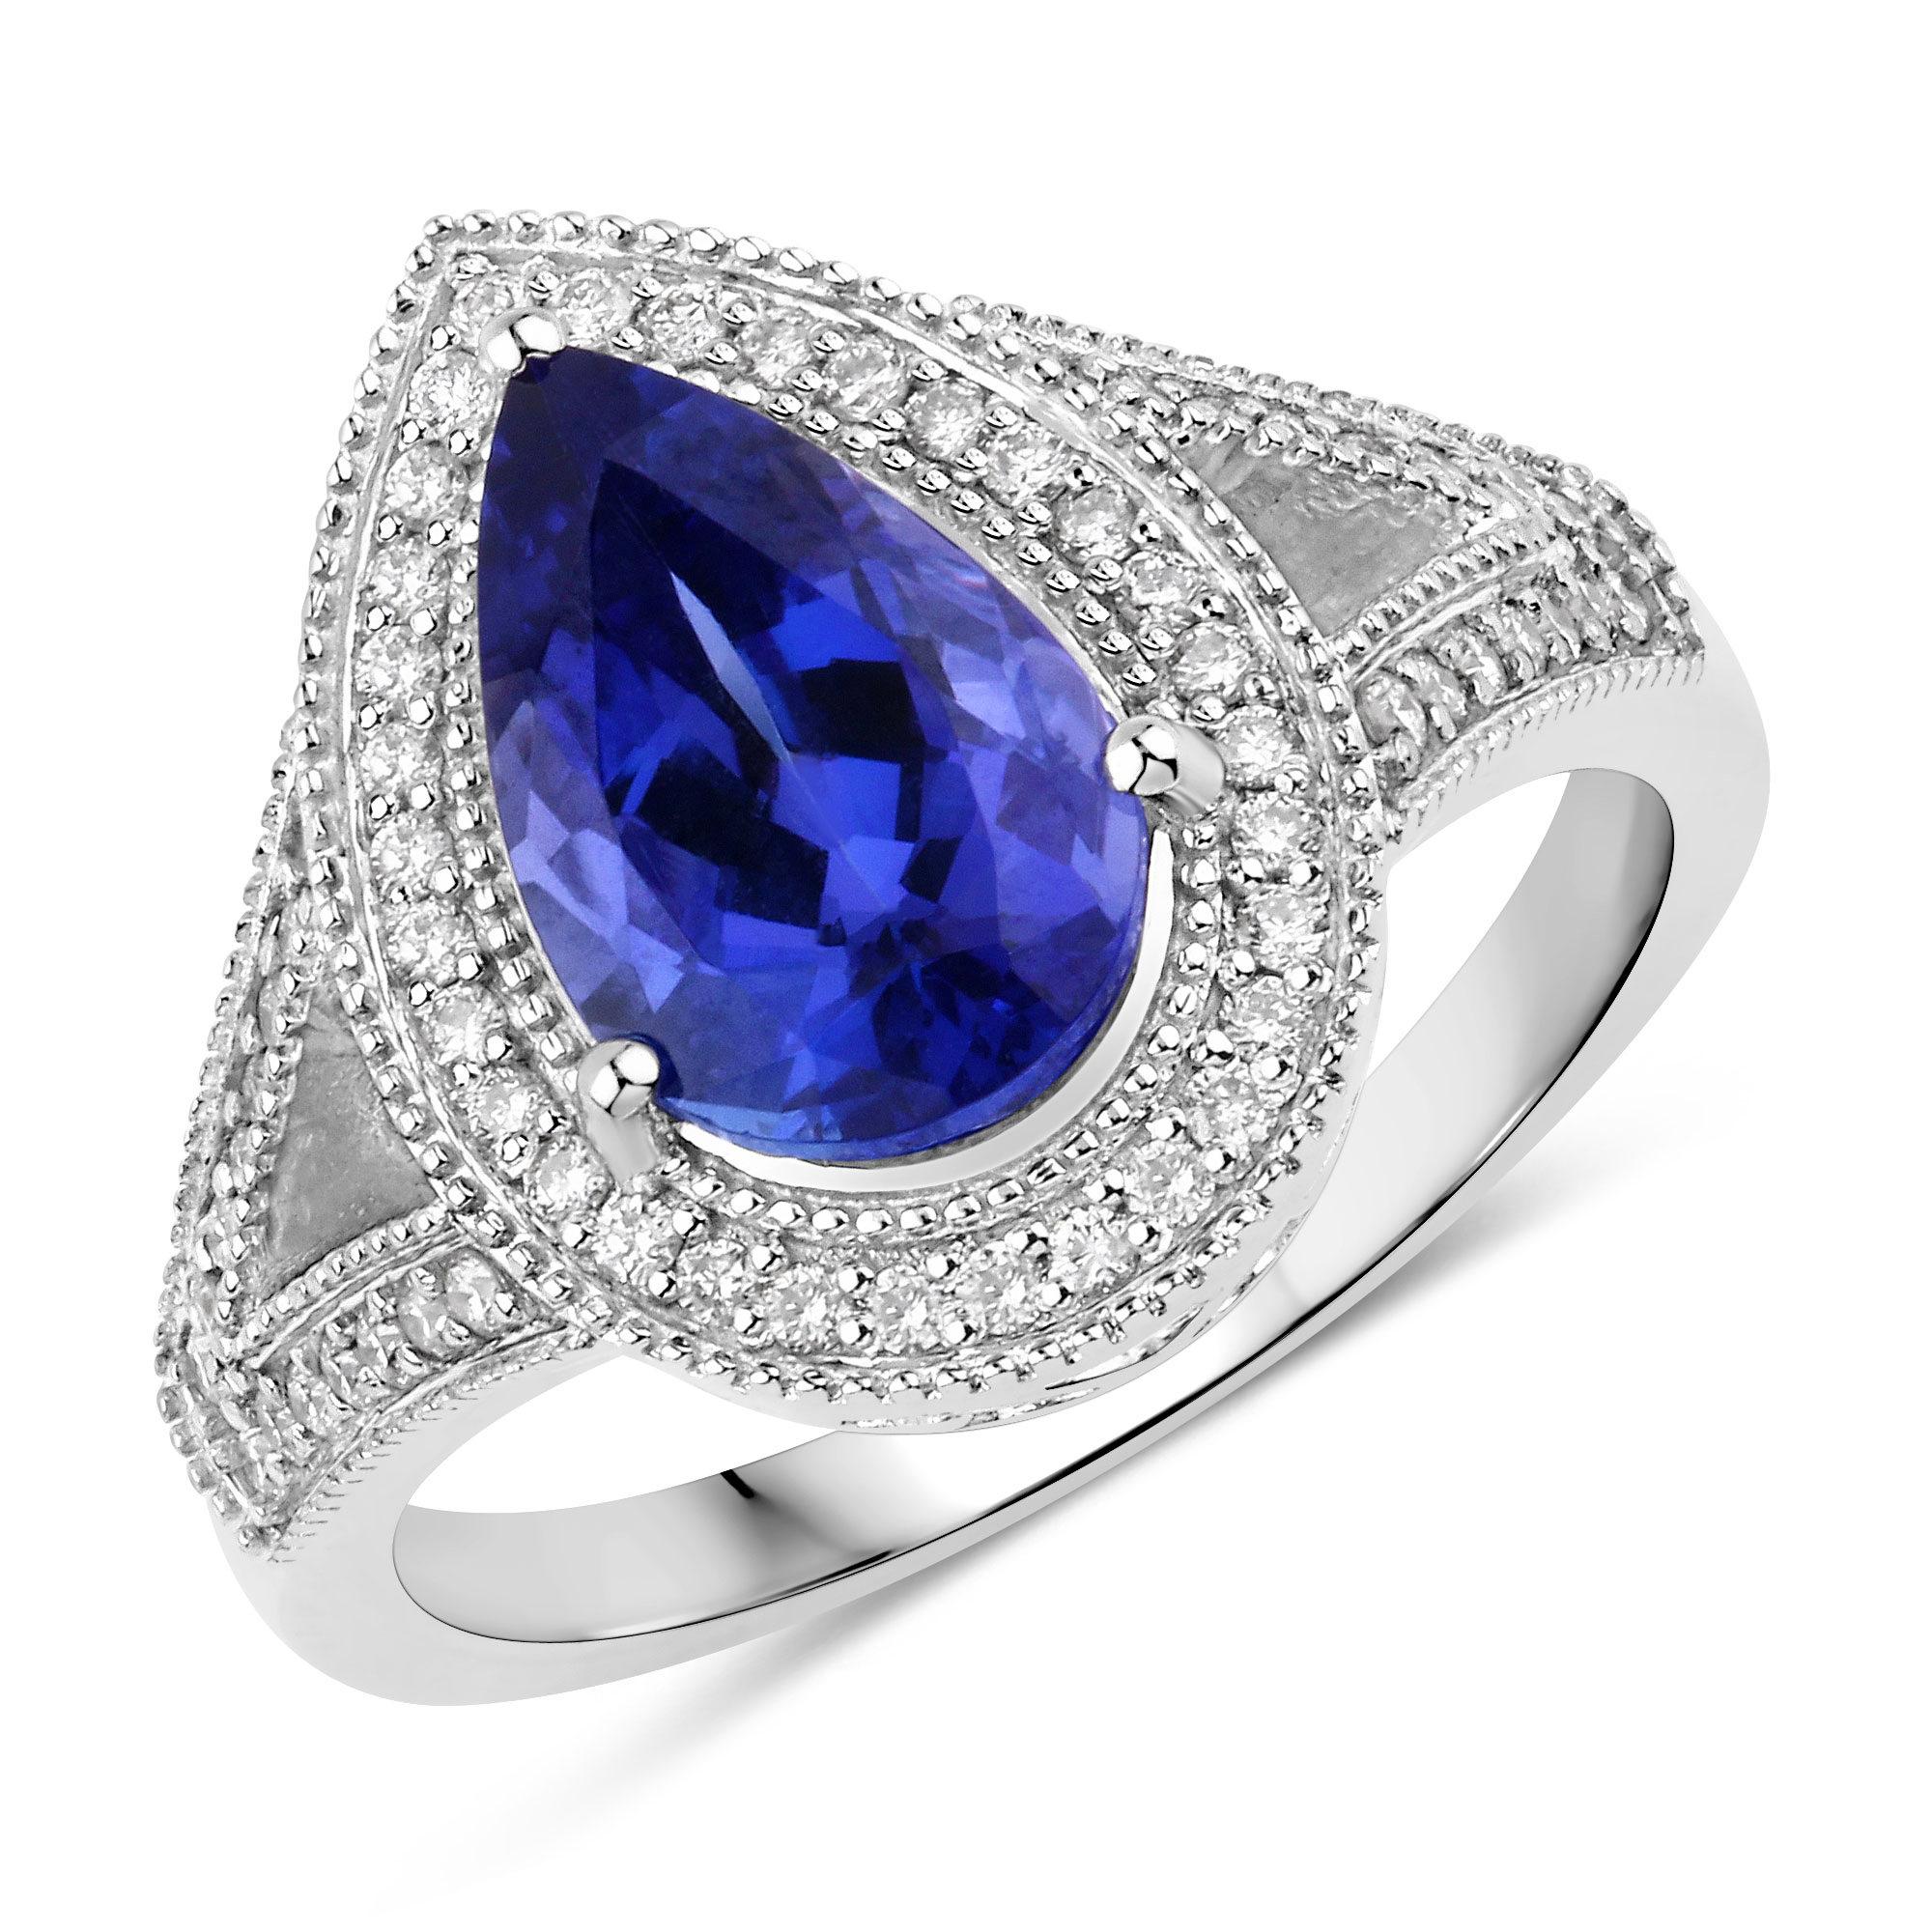 It comes with the appraisal by GIA GG/AJP
All Gemstones are Natural
Pear Cut Tanzanite = 2.33 Carat
60 Round Diamonds = 0.27 Carats
Metal: 14K White Gold
Ring Size: 7* US
*It can be resized complimentary